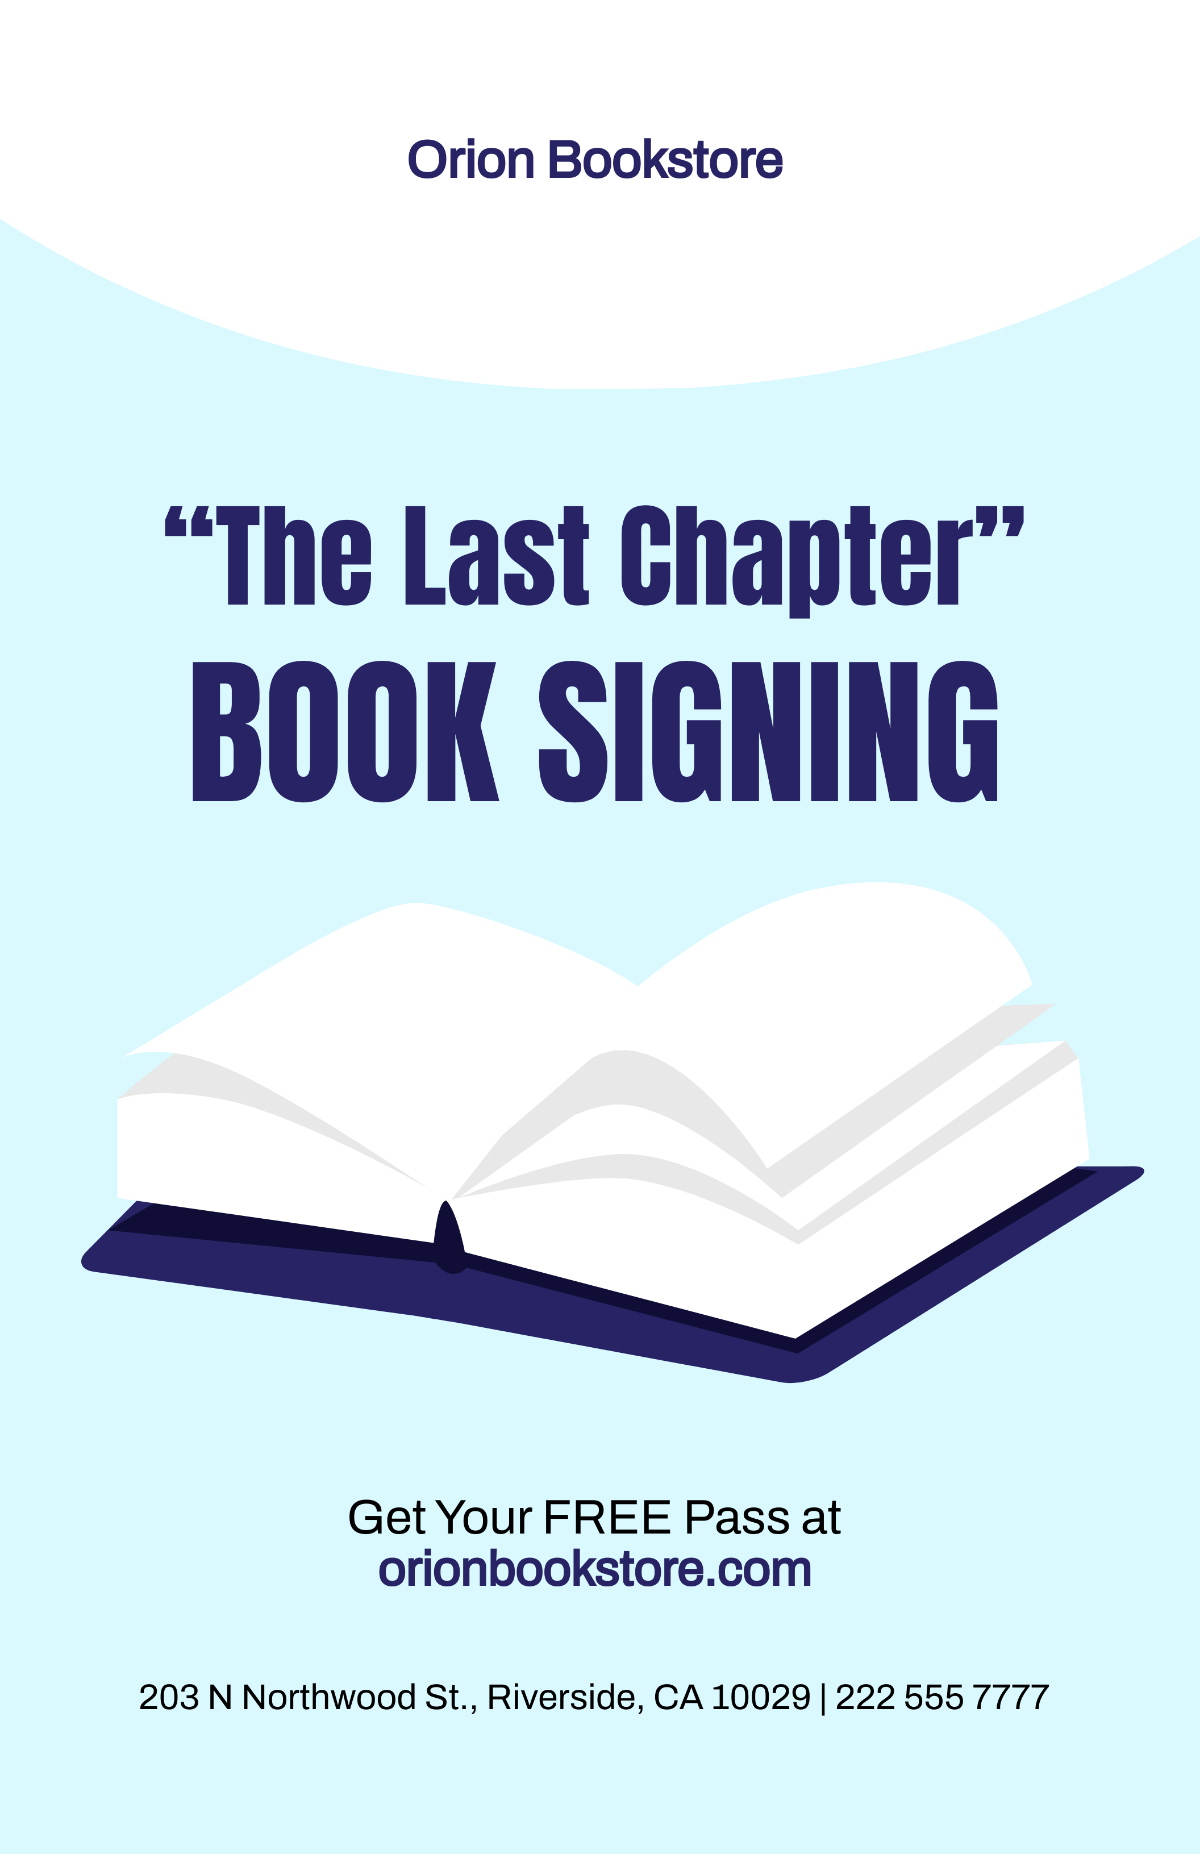 Sample Book Signing Poster Template